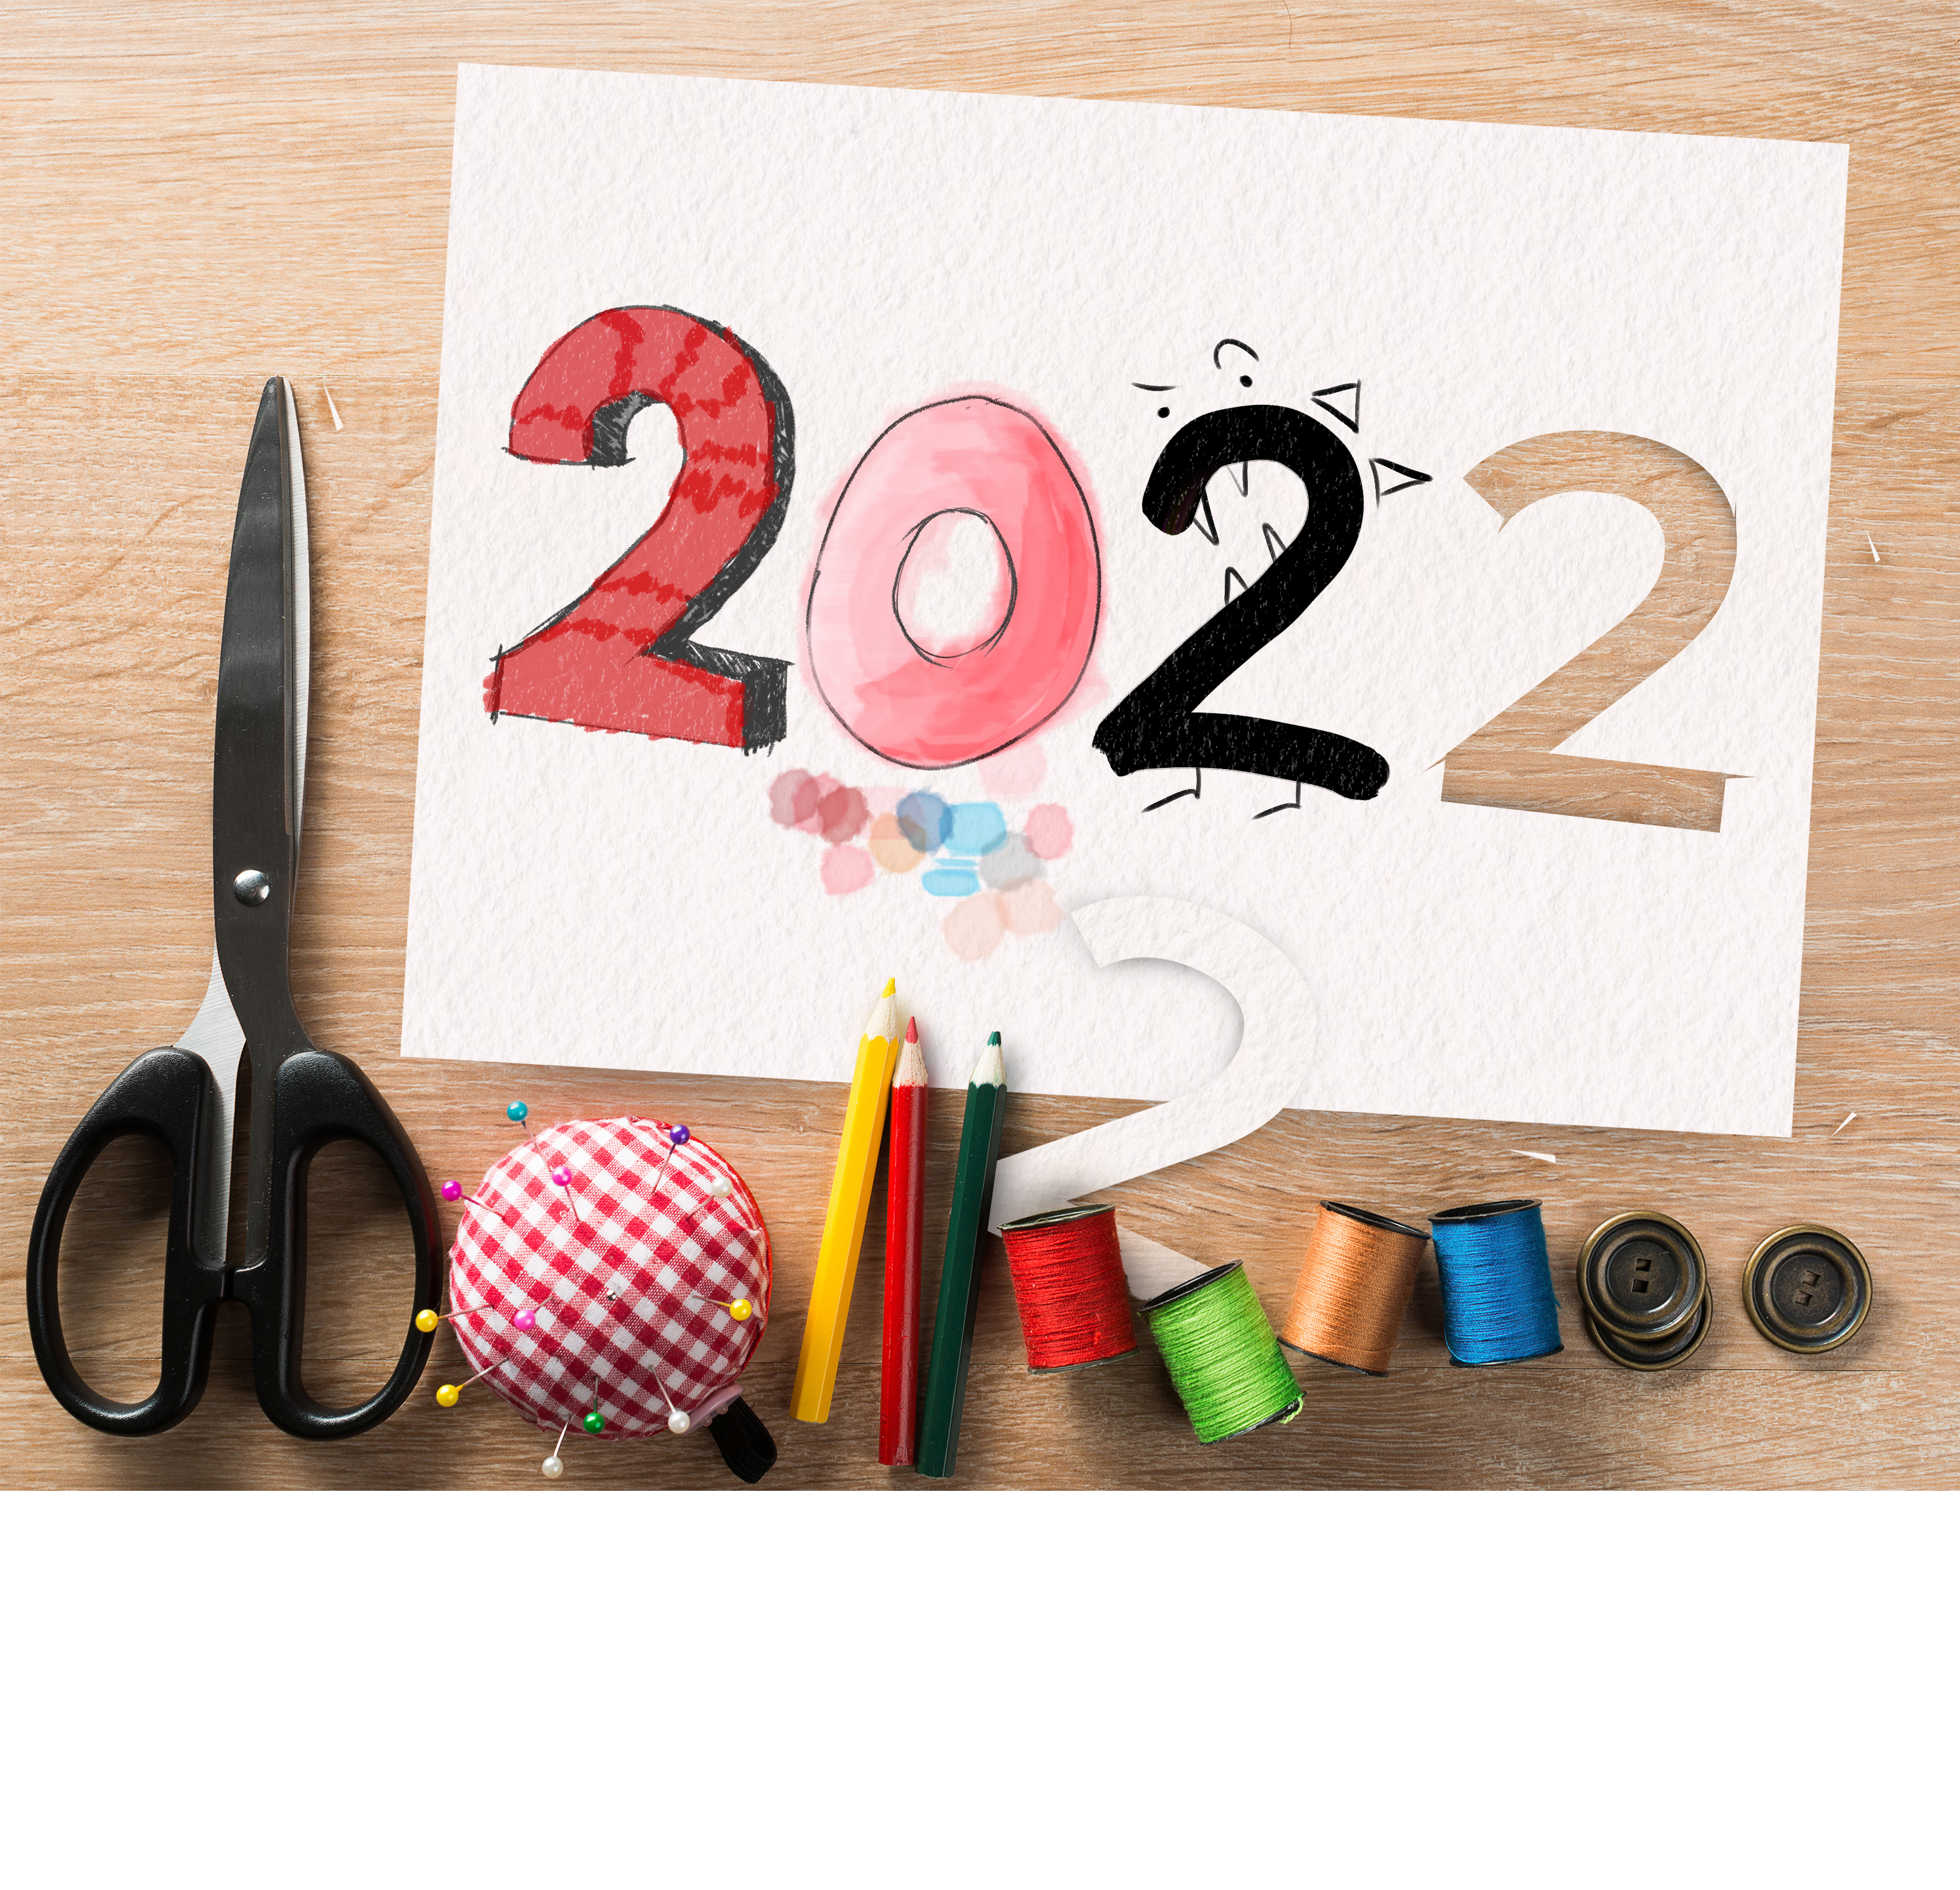 5 Crafts to Try in 2022